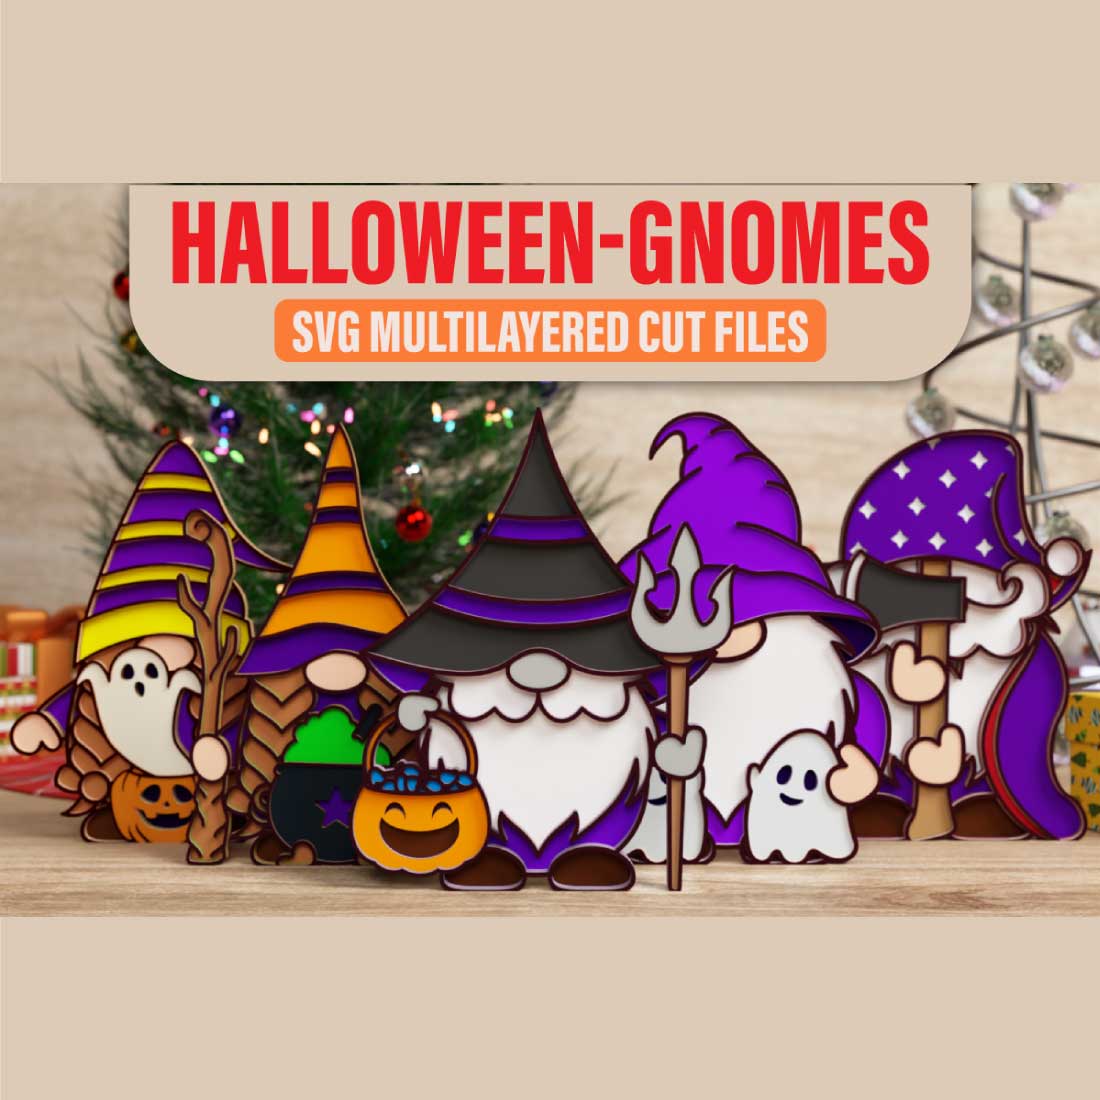 Halloween Gnome 3D SVG Multilayered Cut Files preview image.